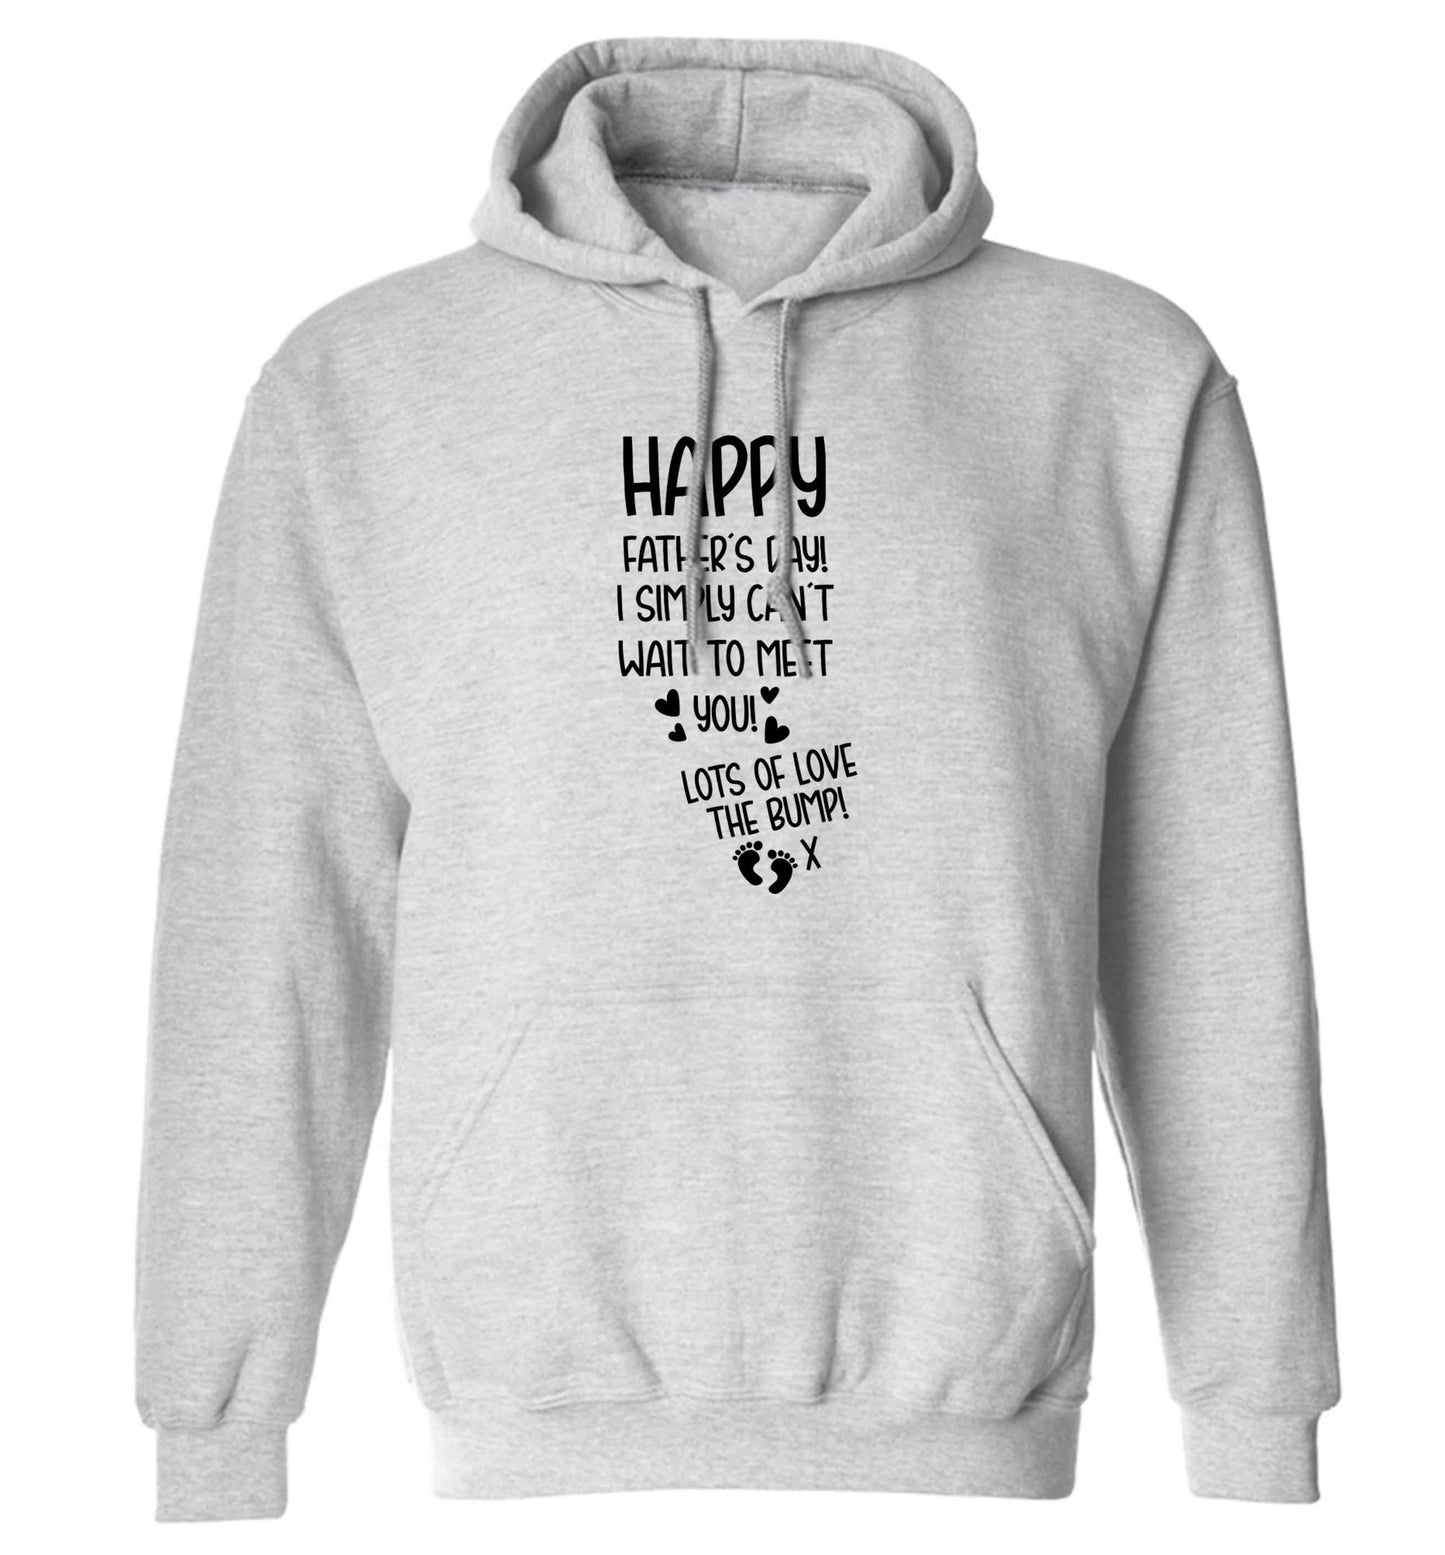 Happy Father's day daddy I can't wait to meet you lot's of love the bump! adults unisex grey hoodie 2XL